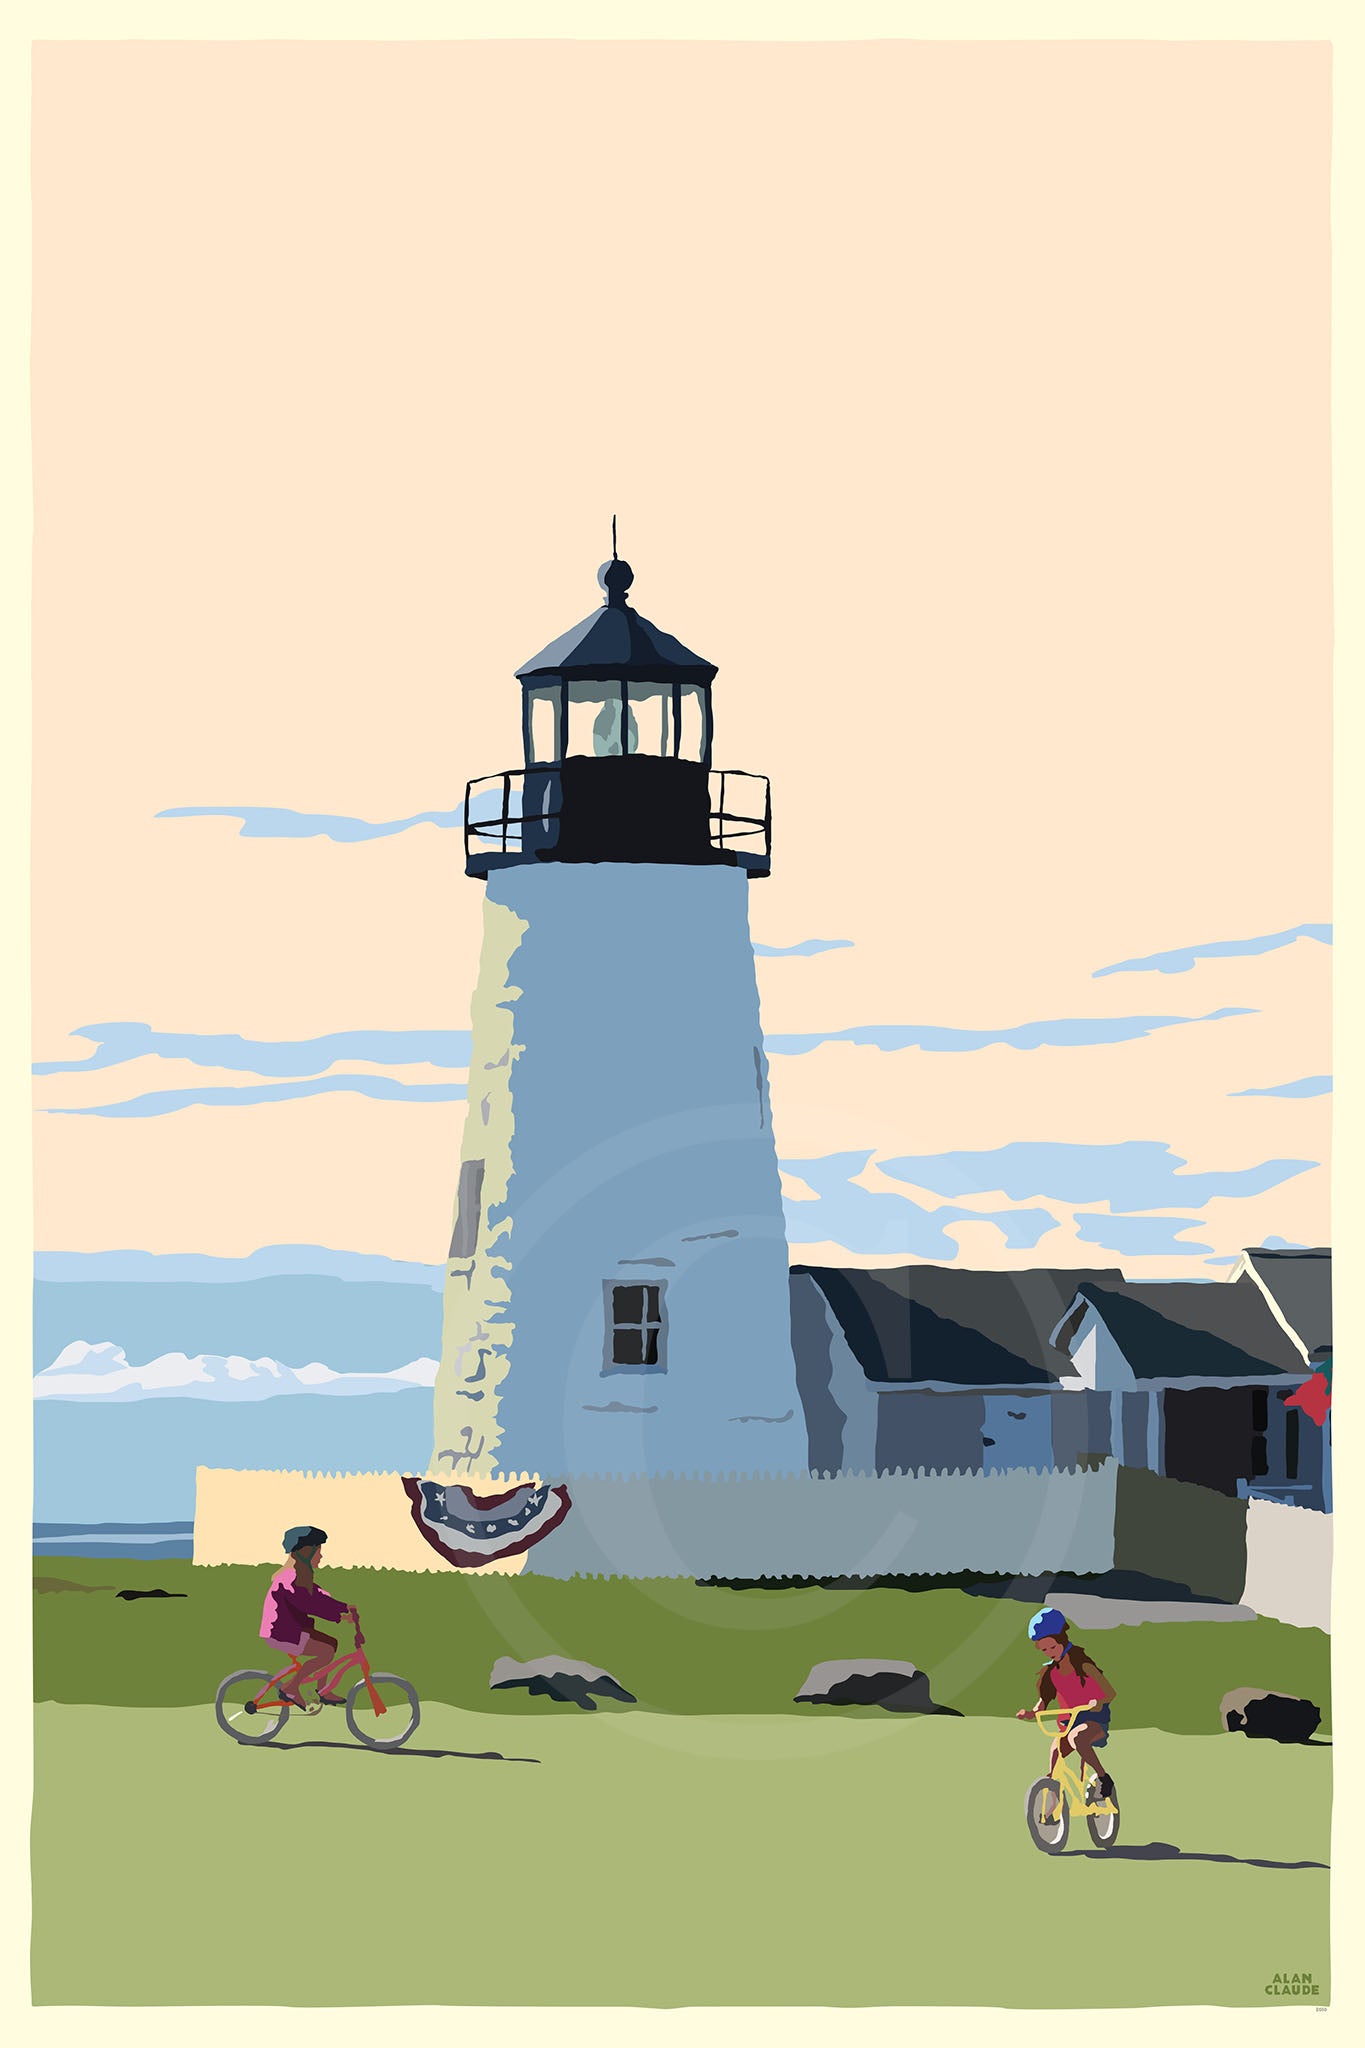 Pemaquid Bicycle Girls Art Print 24" x 36" Travel Poster By Alan Claude - Maine